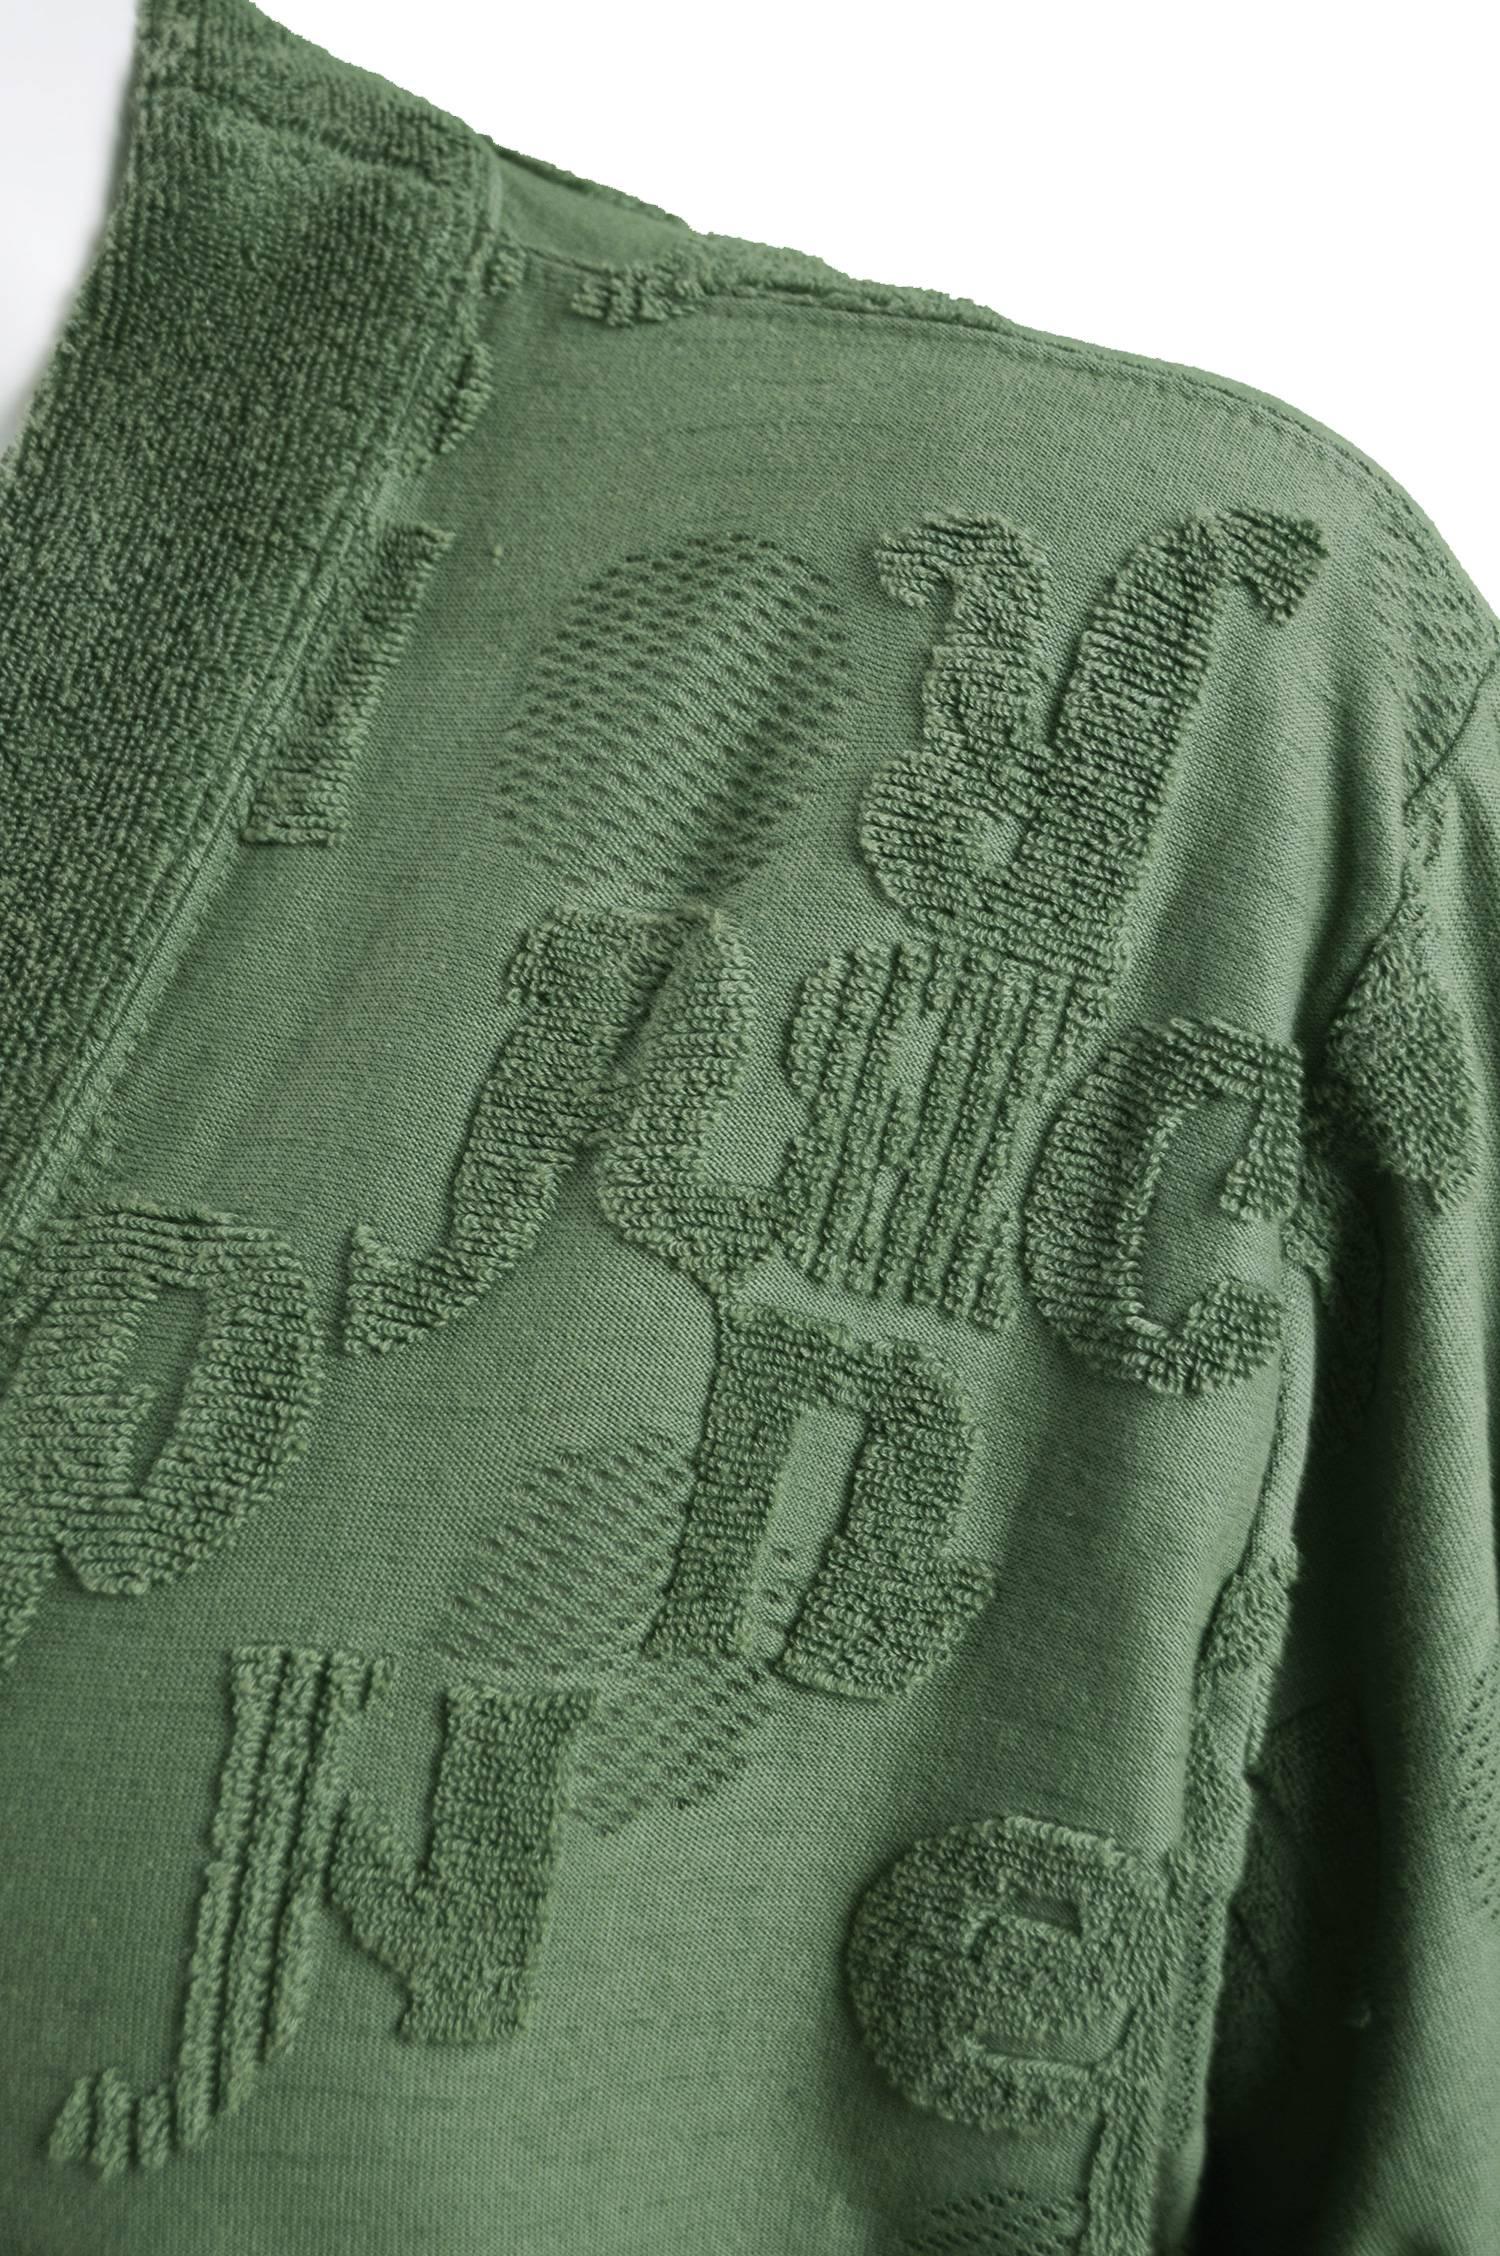 Matsuda Men's Vintage Green Alphabet Chenille Knit Cardigan, 1980s In Excellent Condition For Sale In Doncaster, South Yorkshire